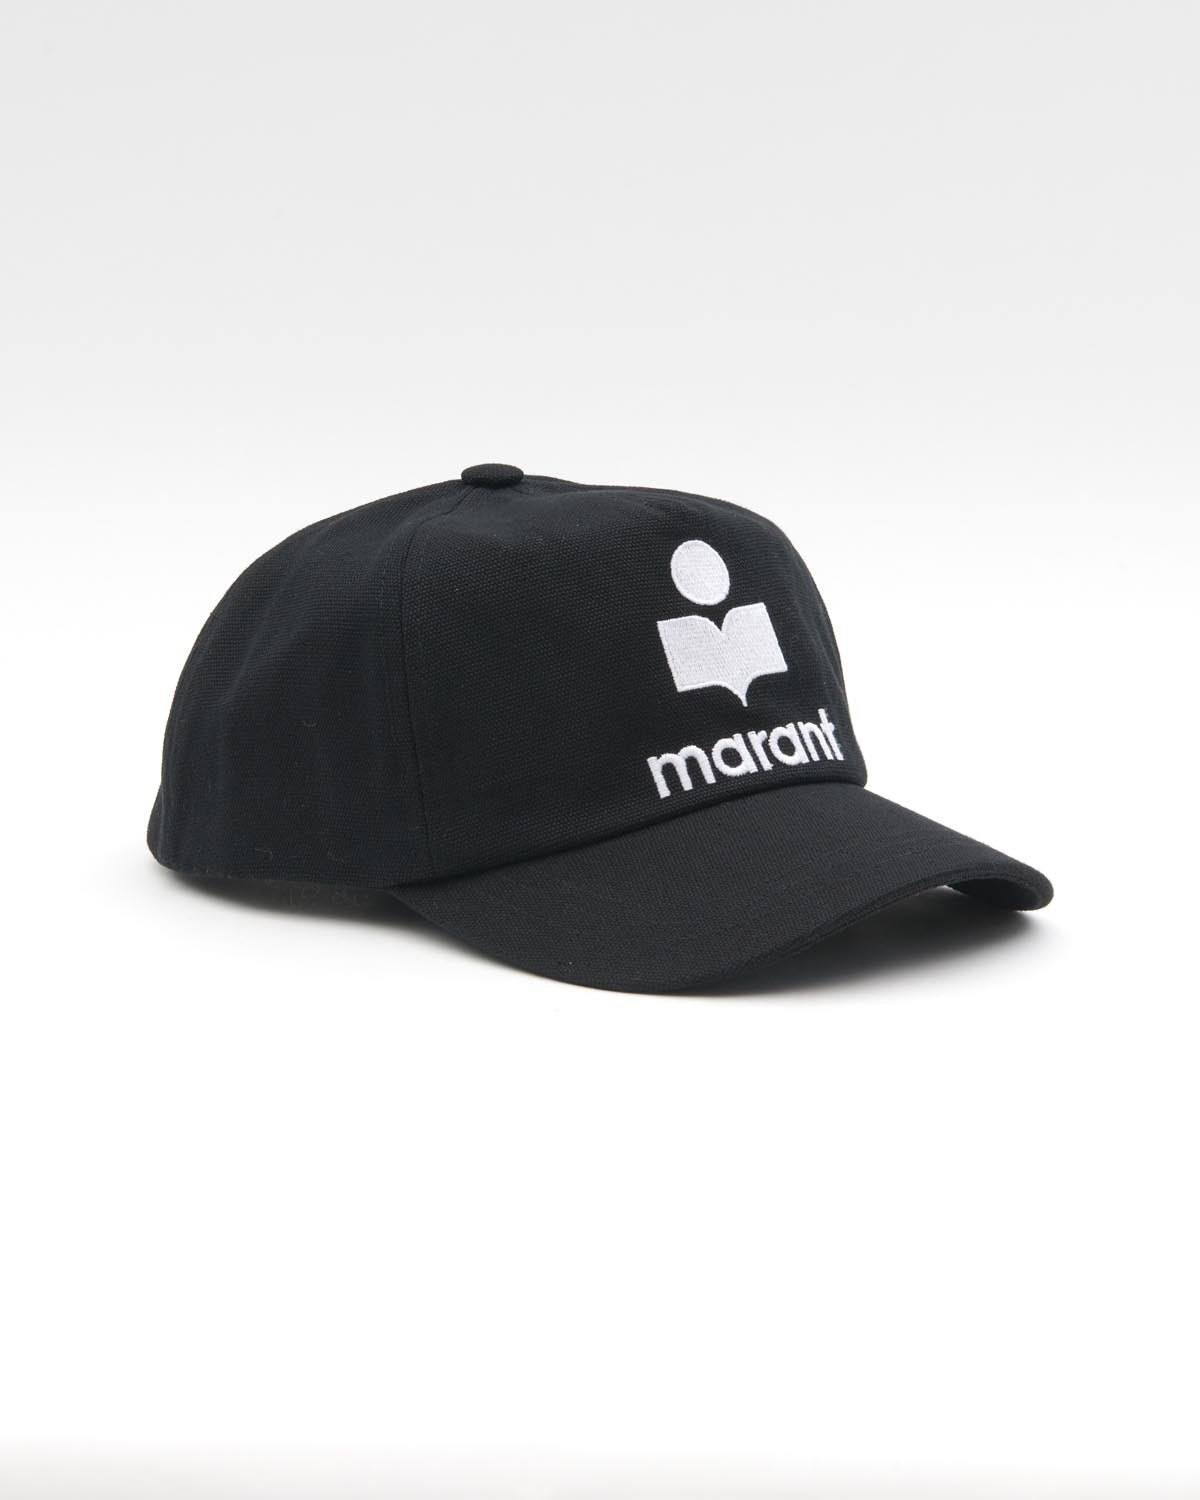 Tyron Cap Woman black and ecru | ISABEL MARANT Official online store